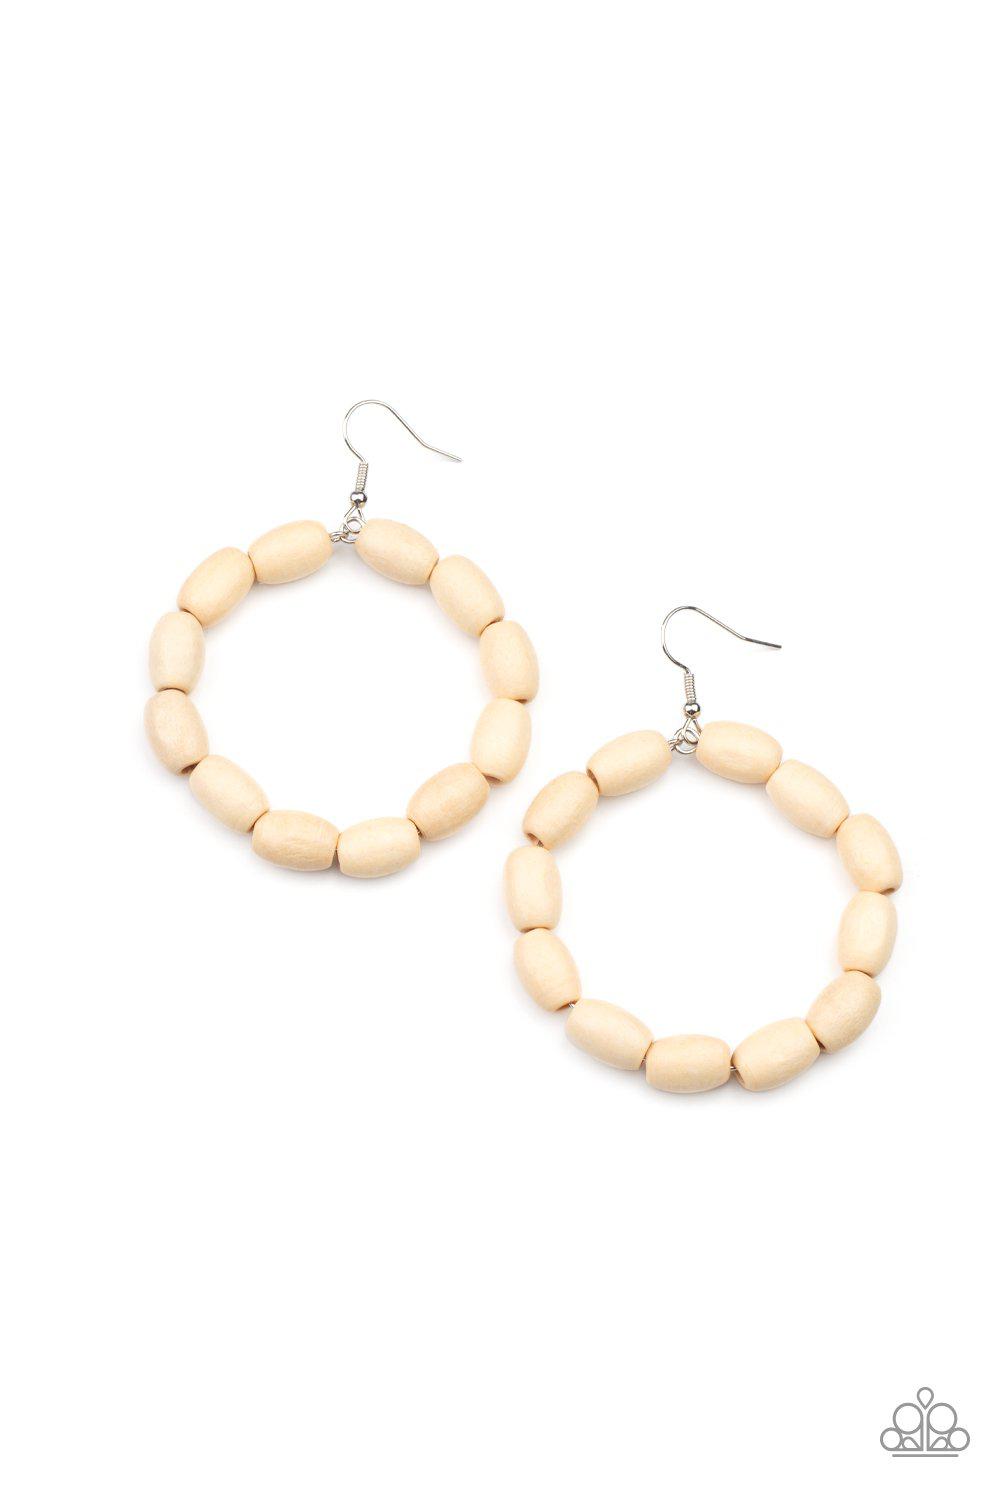 Living The WOOD Life White Wood Earrings - Paparazzi Accessories- lightbox - CarasShop.com - $5 Jewelry by Cara Jewels